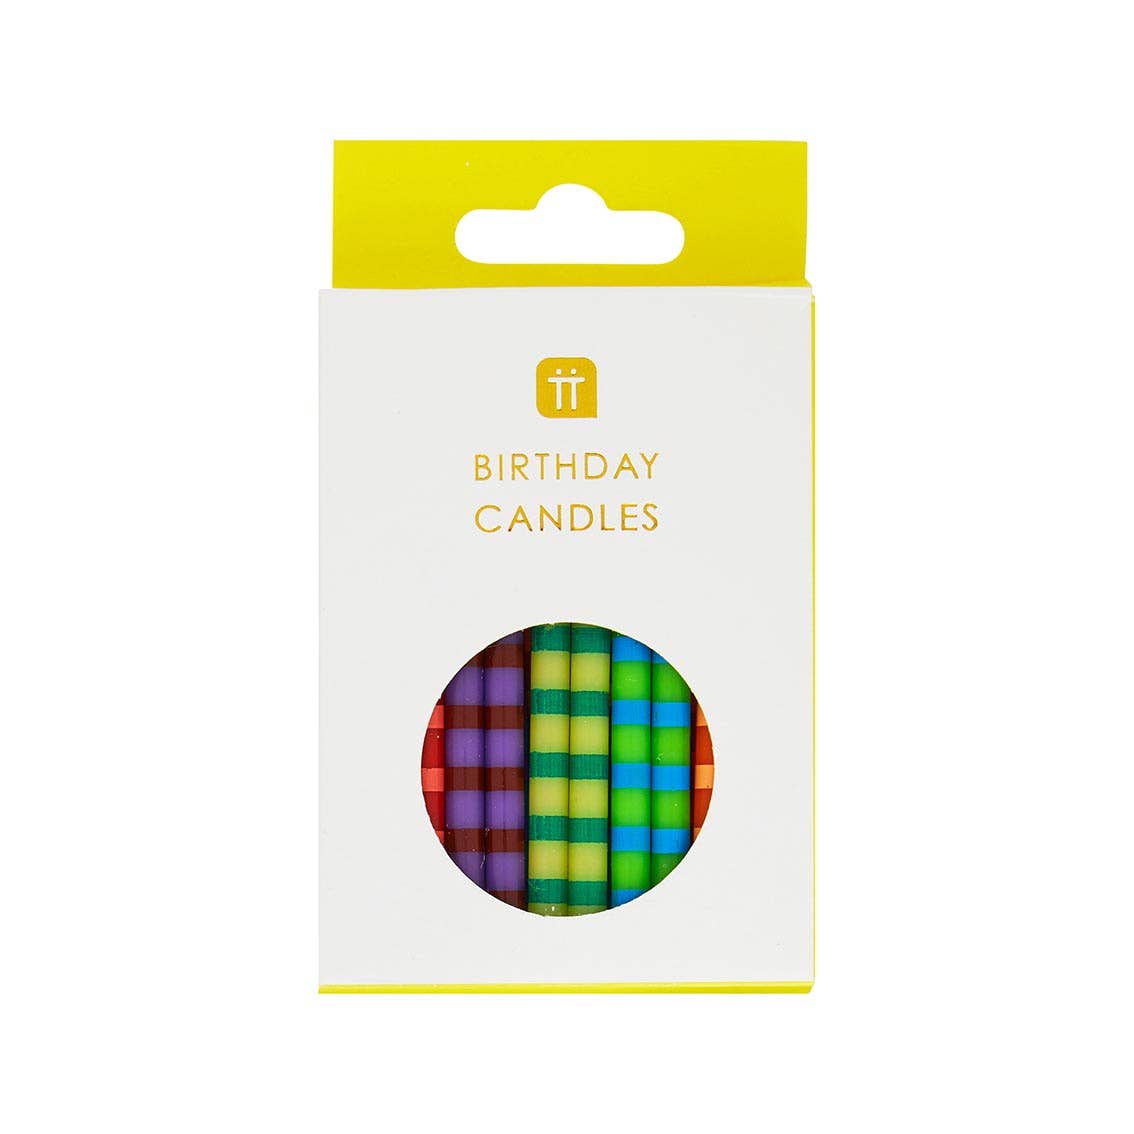 Striped Birthday Candles - 24 Pack - The Crowd Went Wild